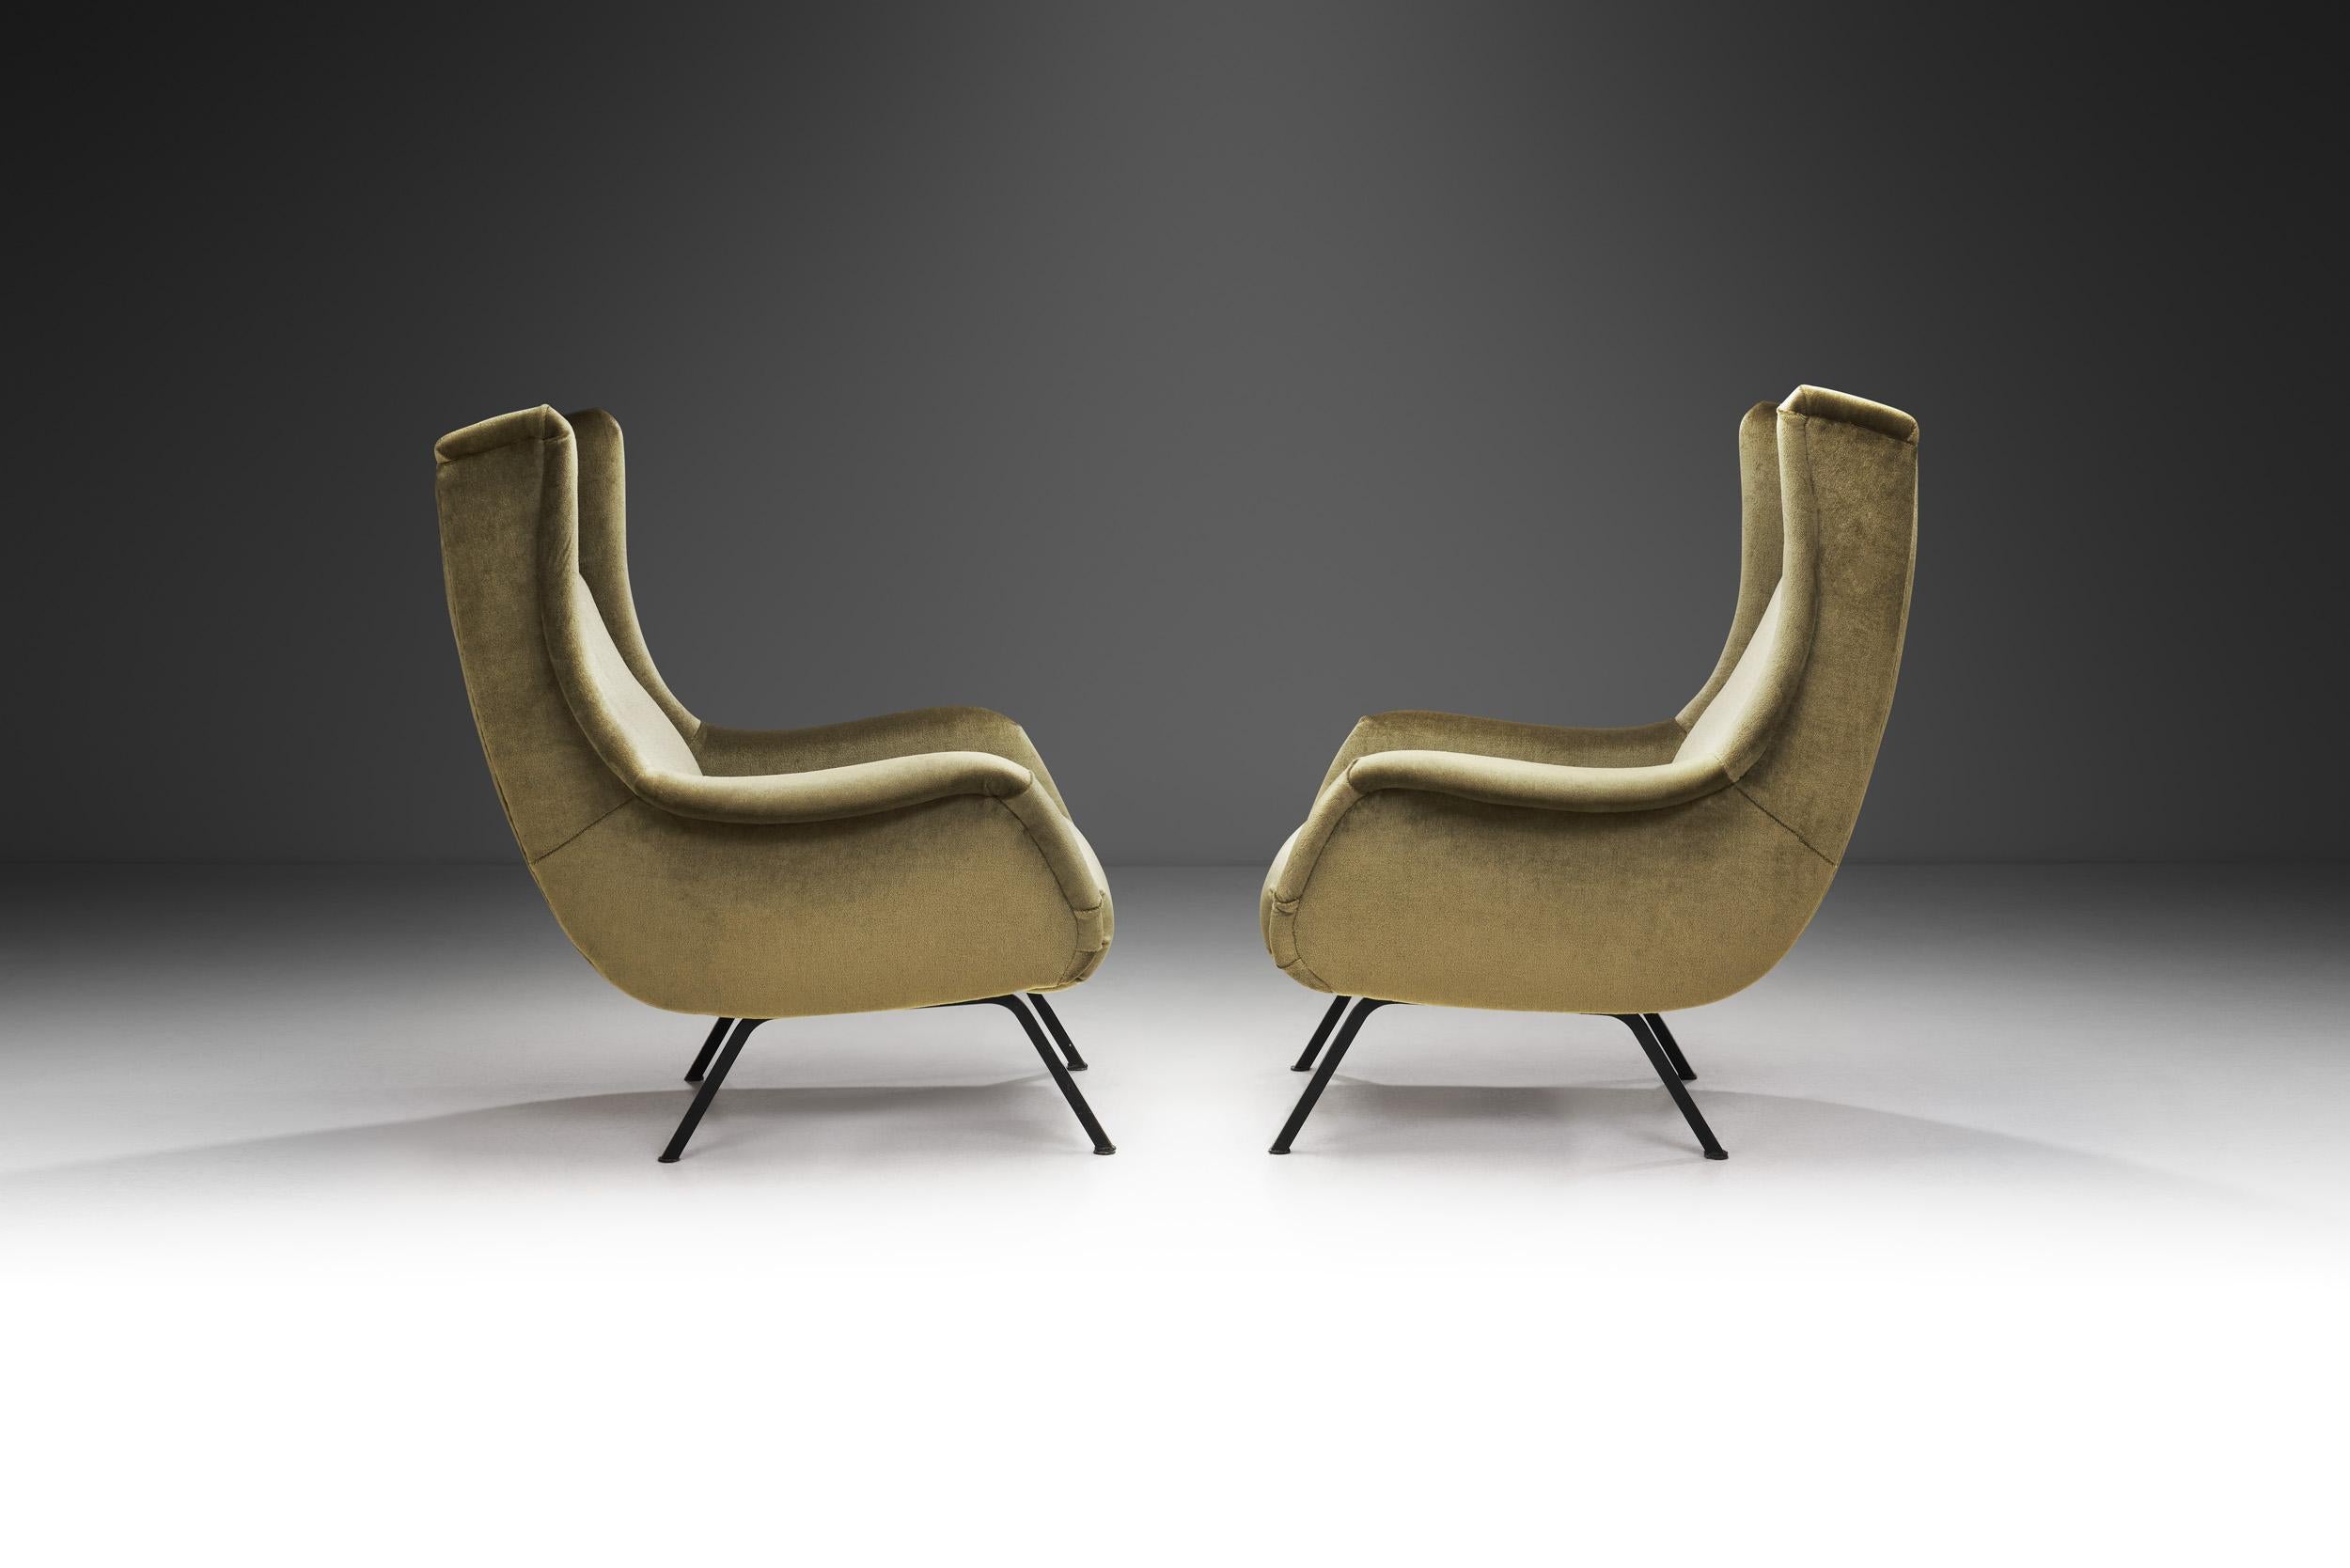 Mid-20th Century Italian Mid-Century Modern Armchairs in Velvet with Steel Frames, Italy 1960s For Sale